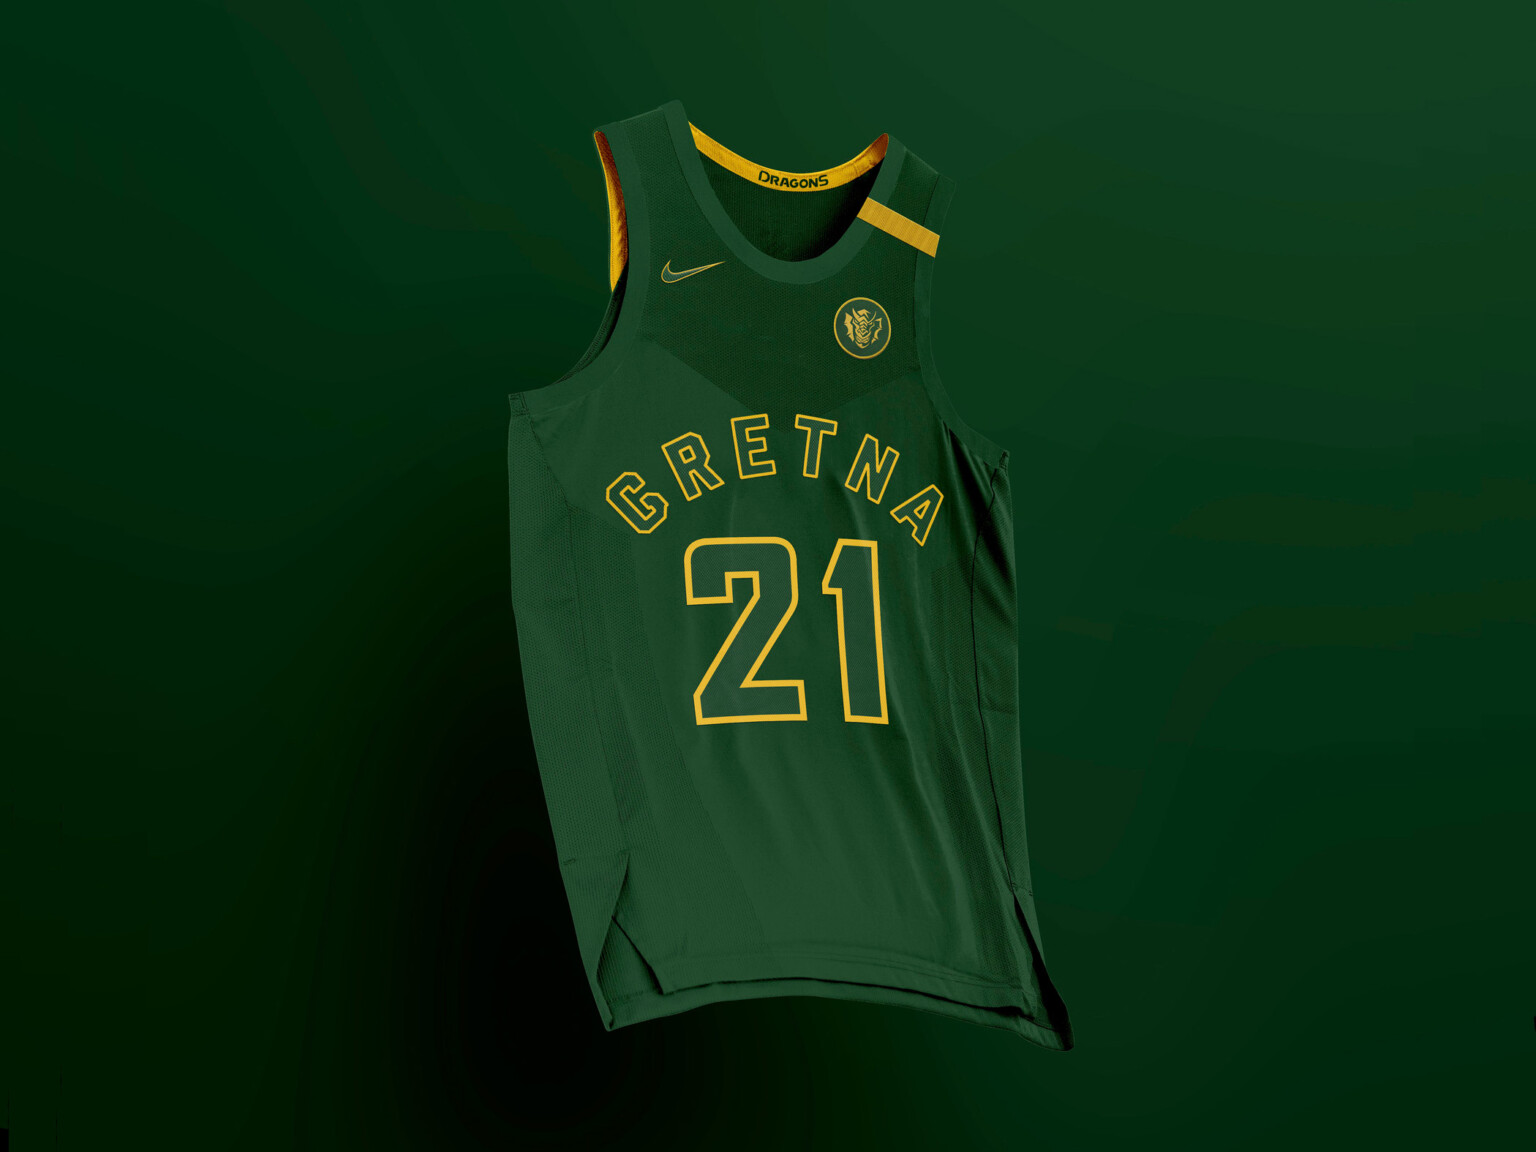 Green basketball jersey with yellow accents